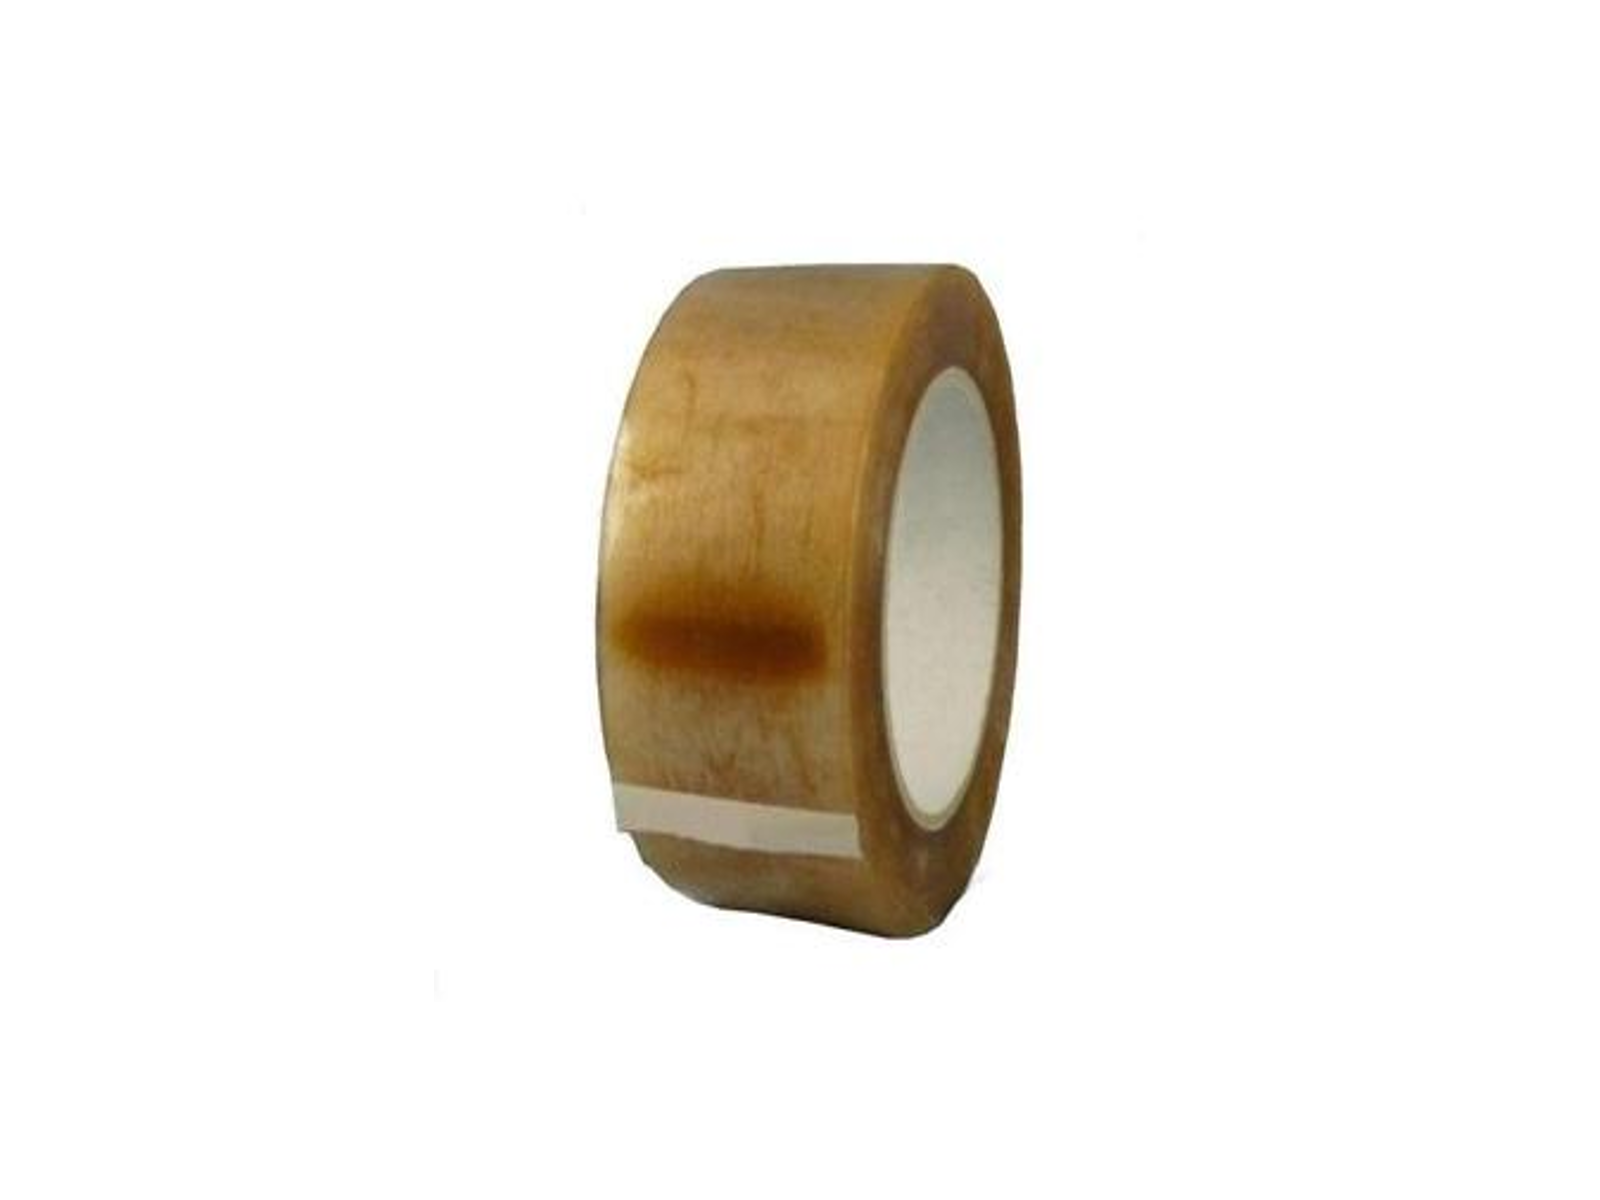 CARTON SEALING TAPE HAND
NATURAL RUBBER CLEAR 3&quot;X 110
YD N8218/500  24/CASE